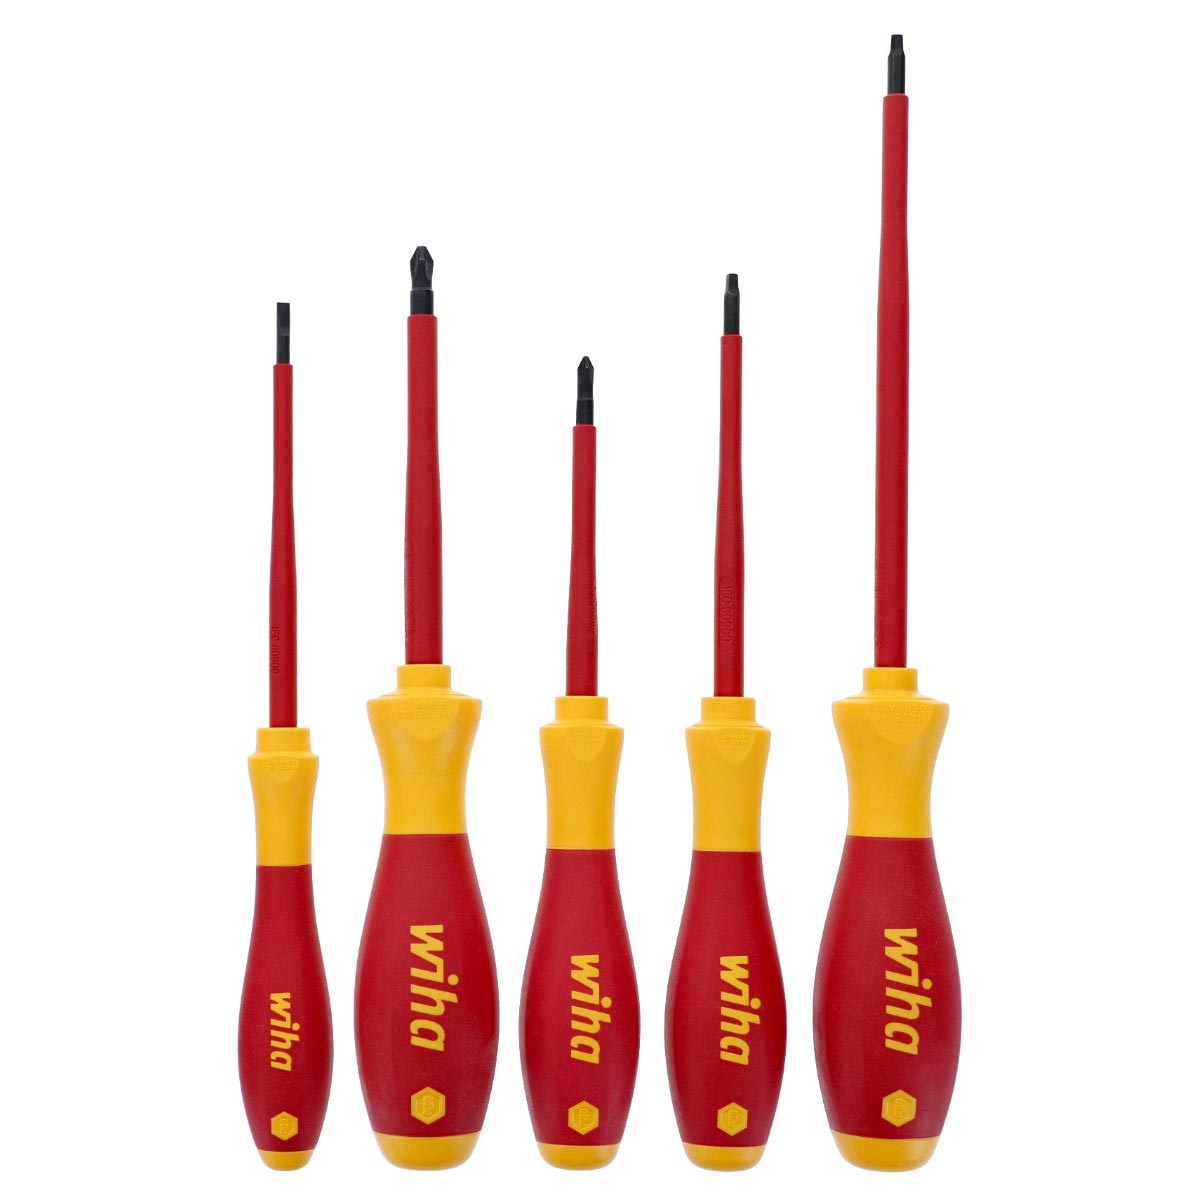 Wiha SoftFinish Slotted/Phillips/Square Insulated Screwdriver Set (5 Piece Set)